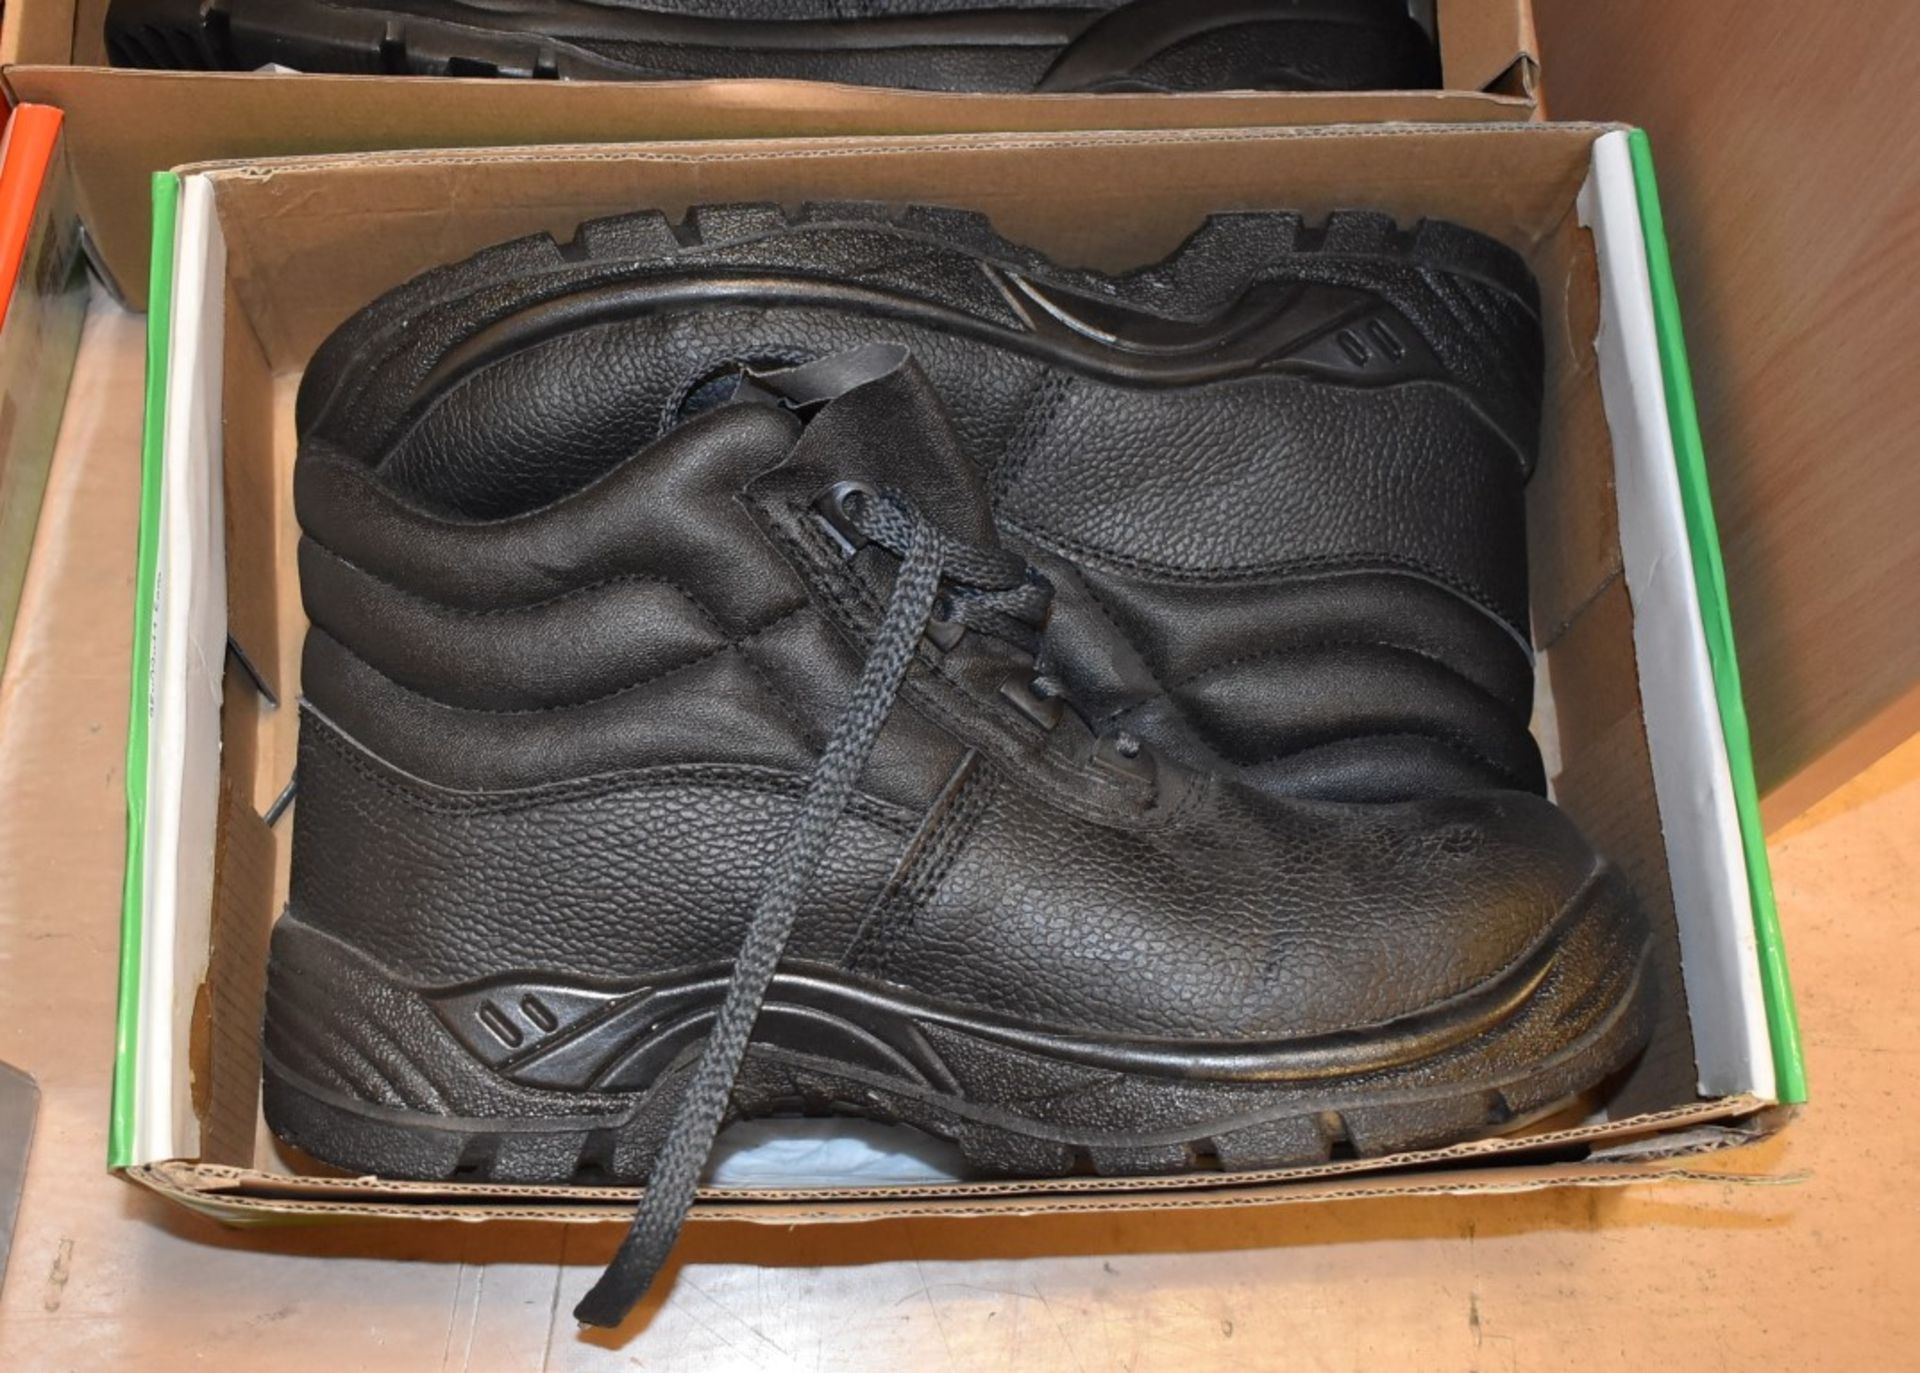 5 x Pairs of Safety Work Boots With Boxes - Various Styles and Sizes Included - Image 6 of 7